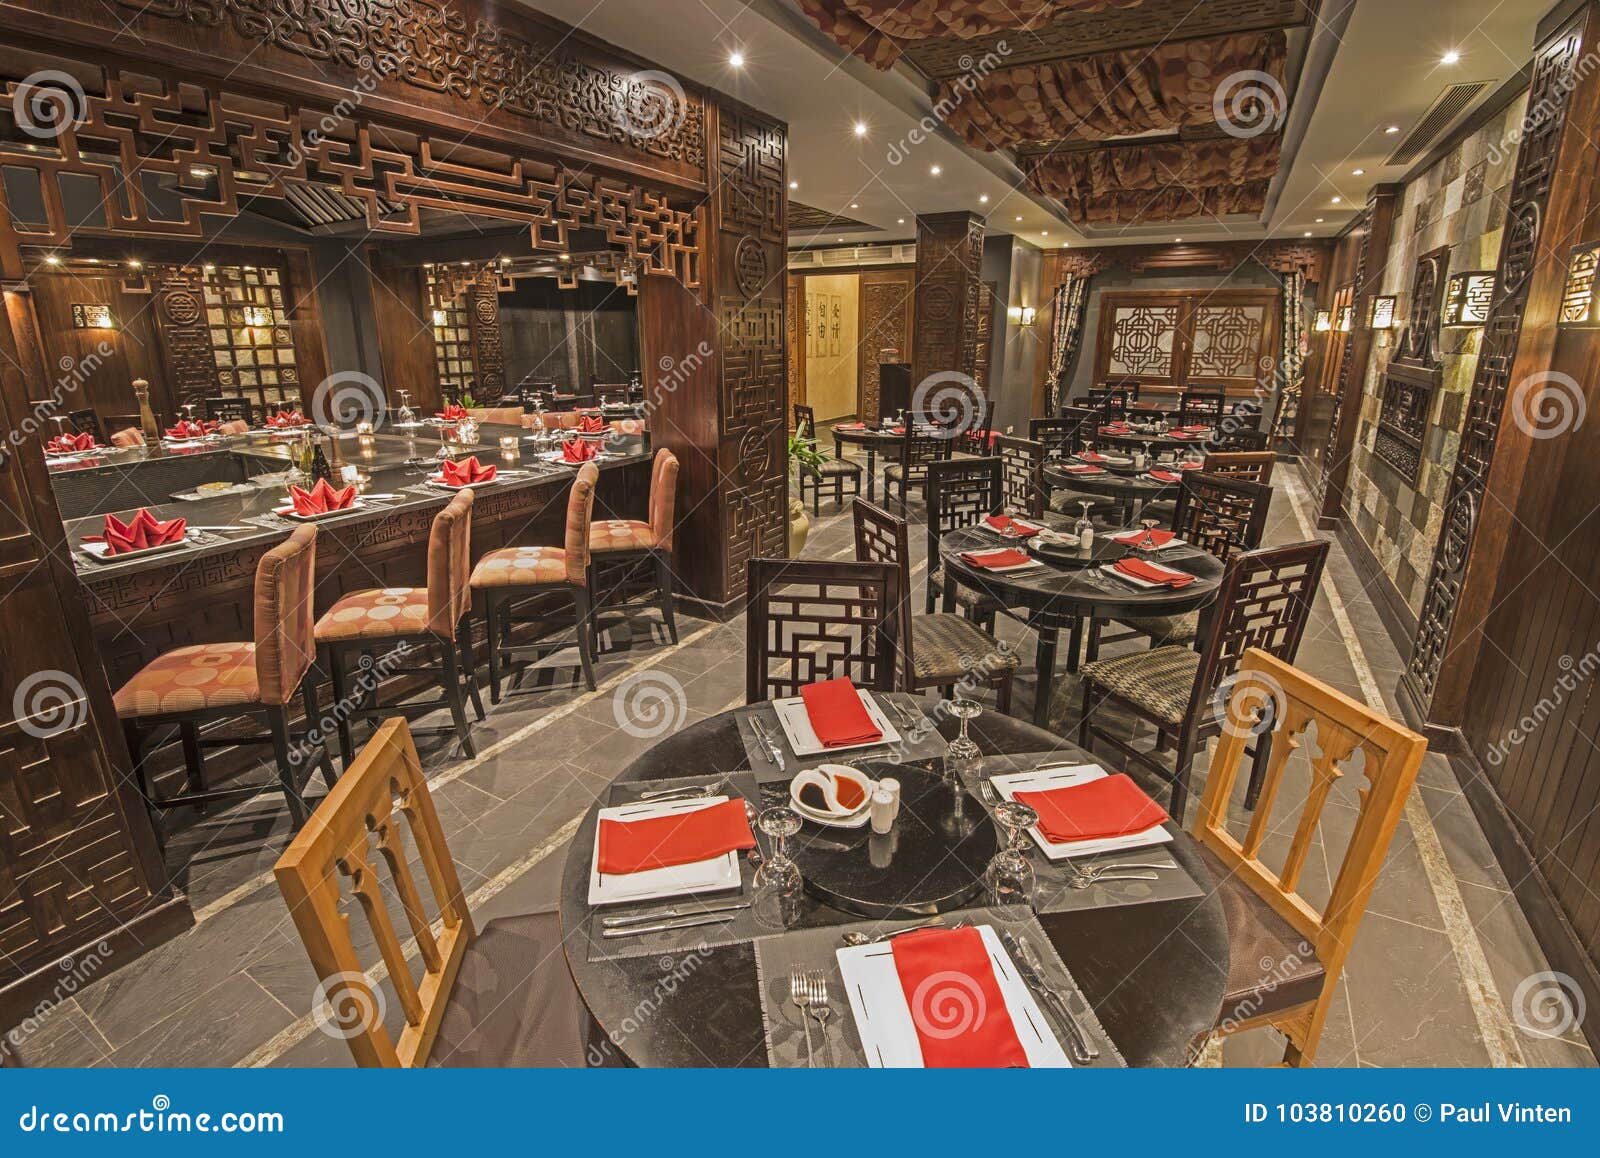 Interior of a Luxury Hotel Asian Restaurant Stock Photo - Image of fork ...